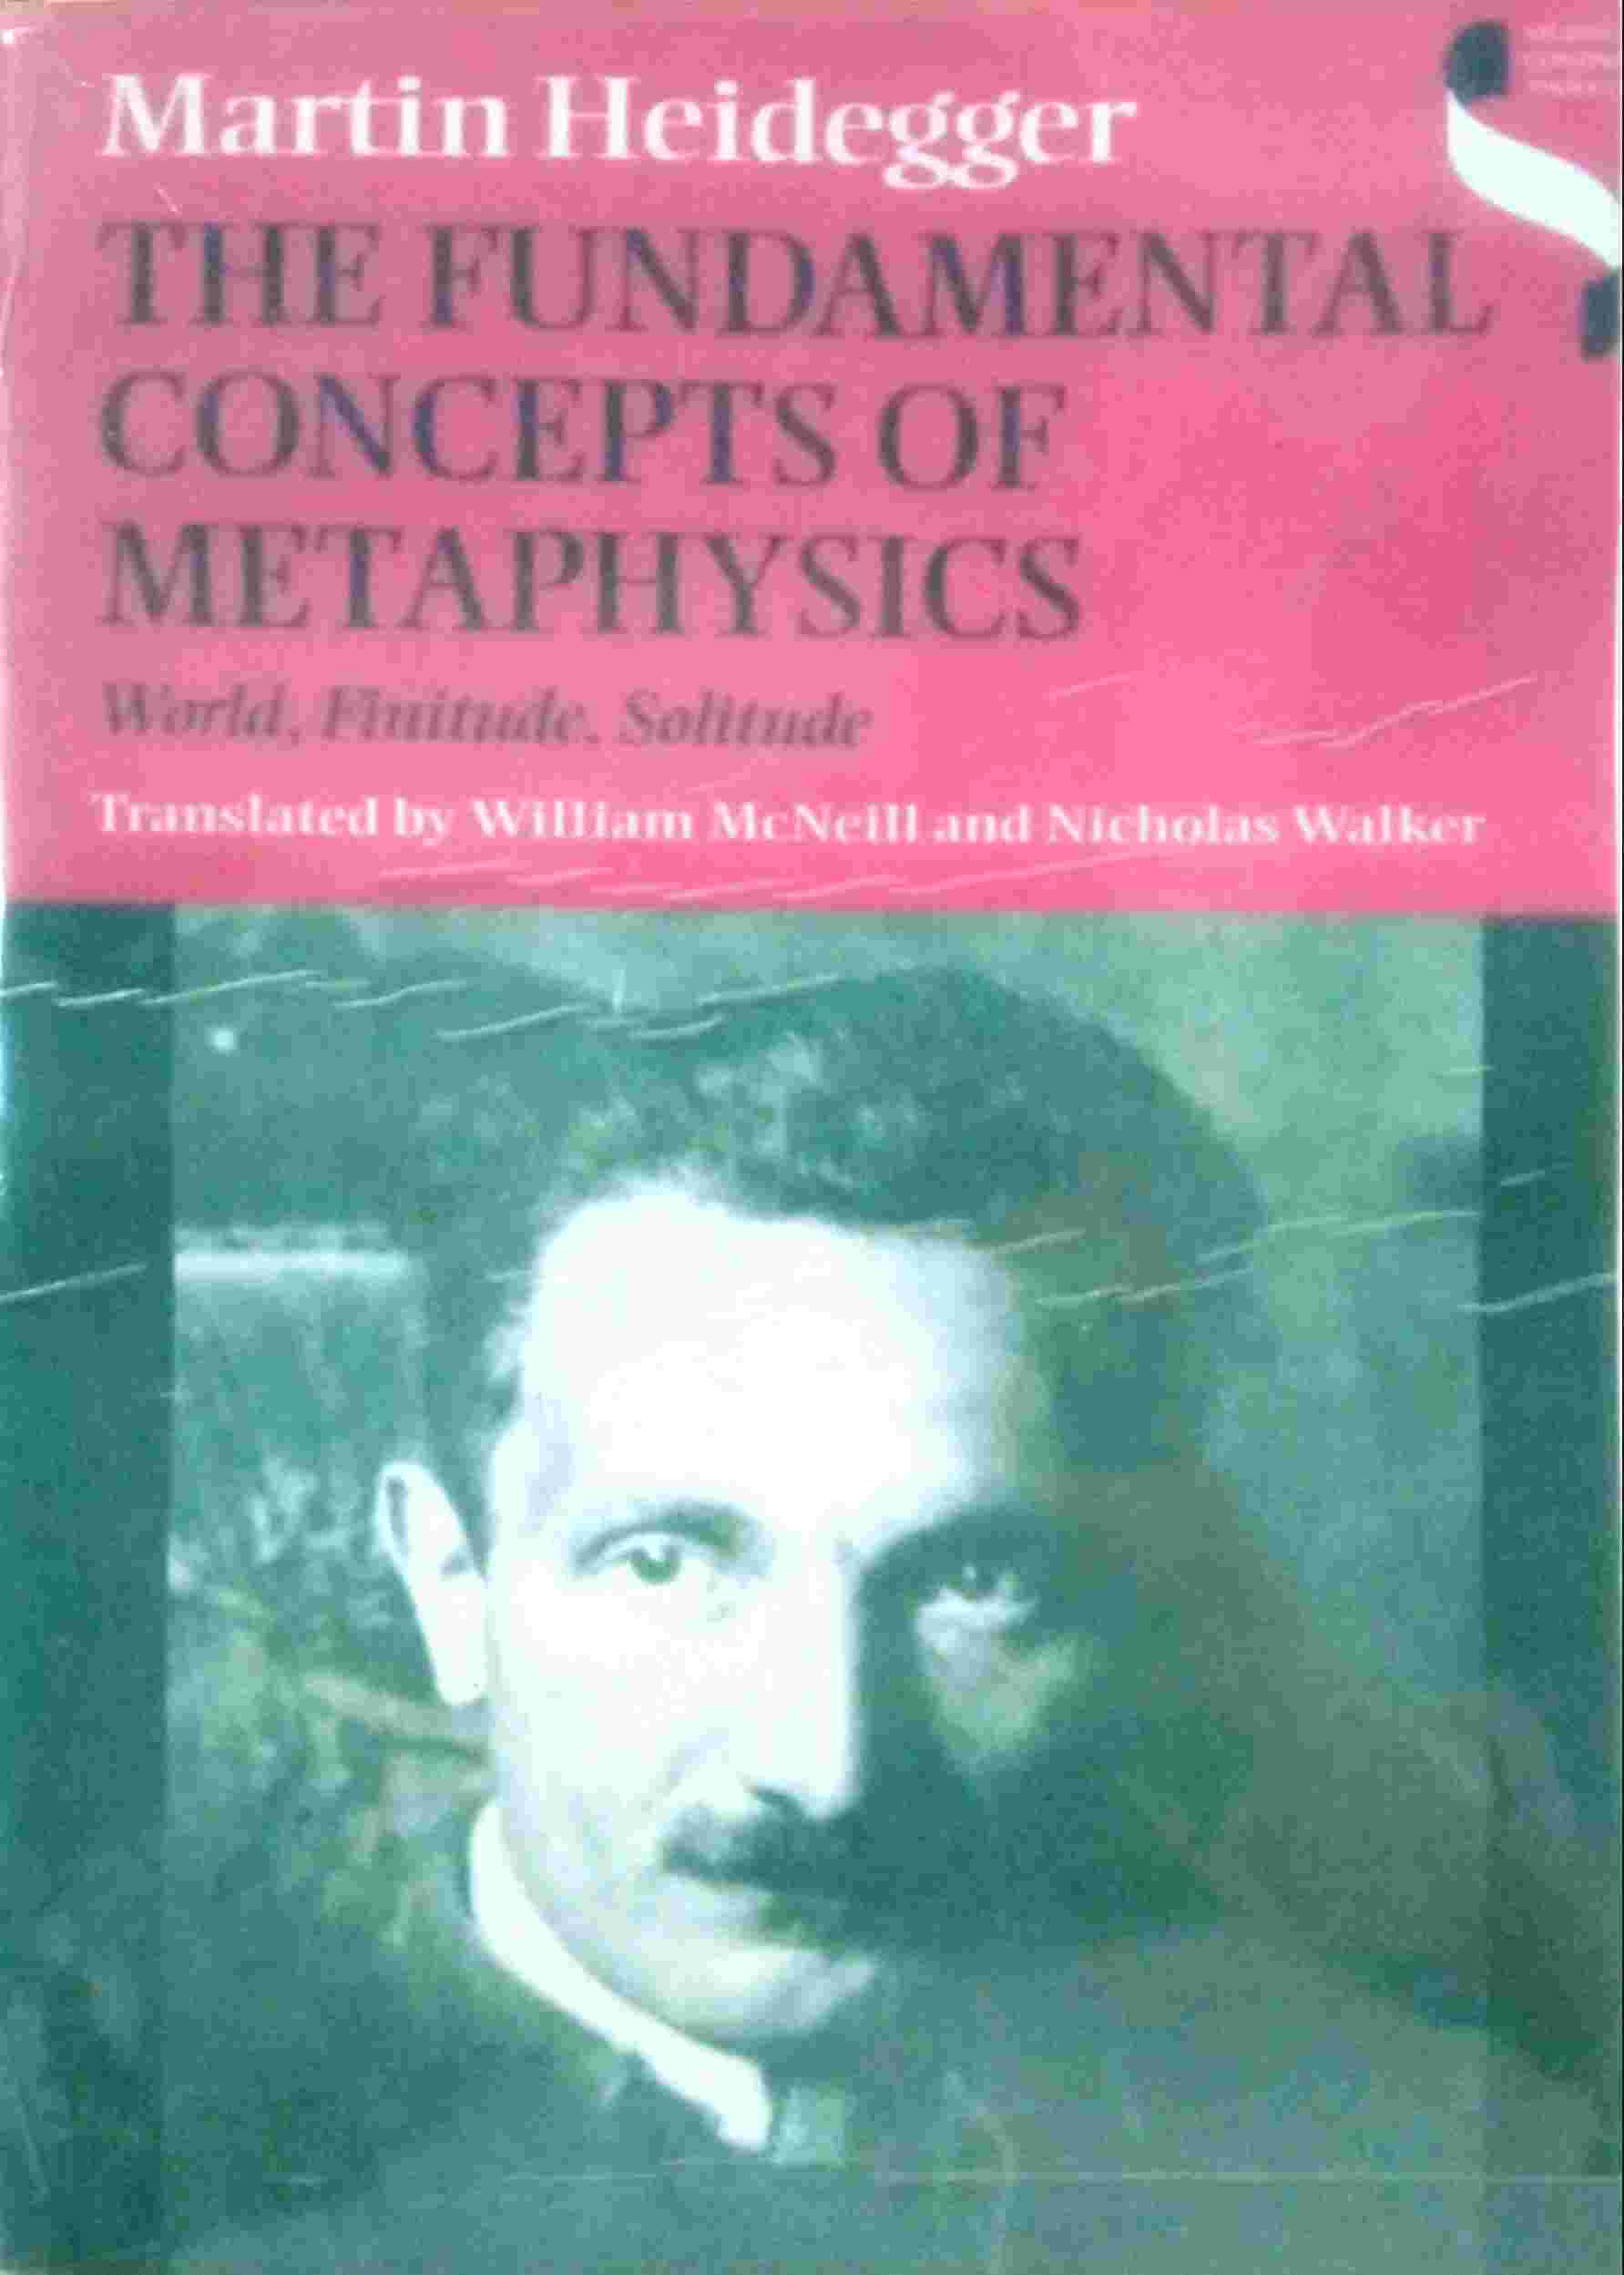 THE FUNDAMENTAL CONCEPTS OF METAPHYSICS